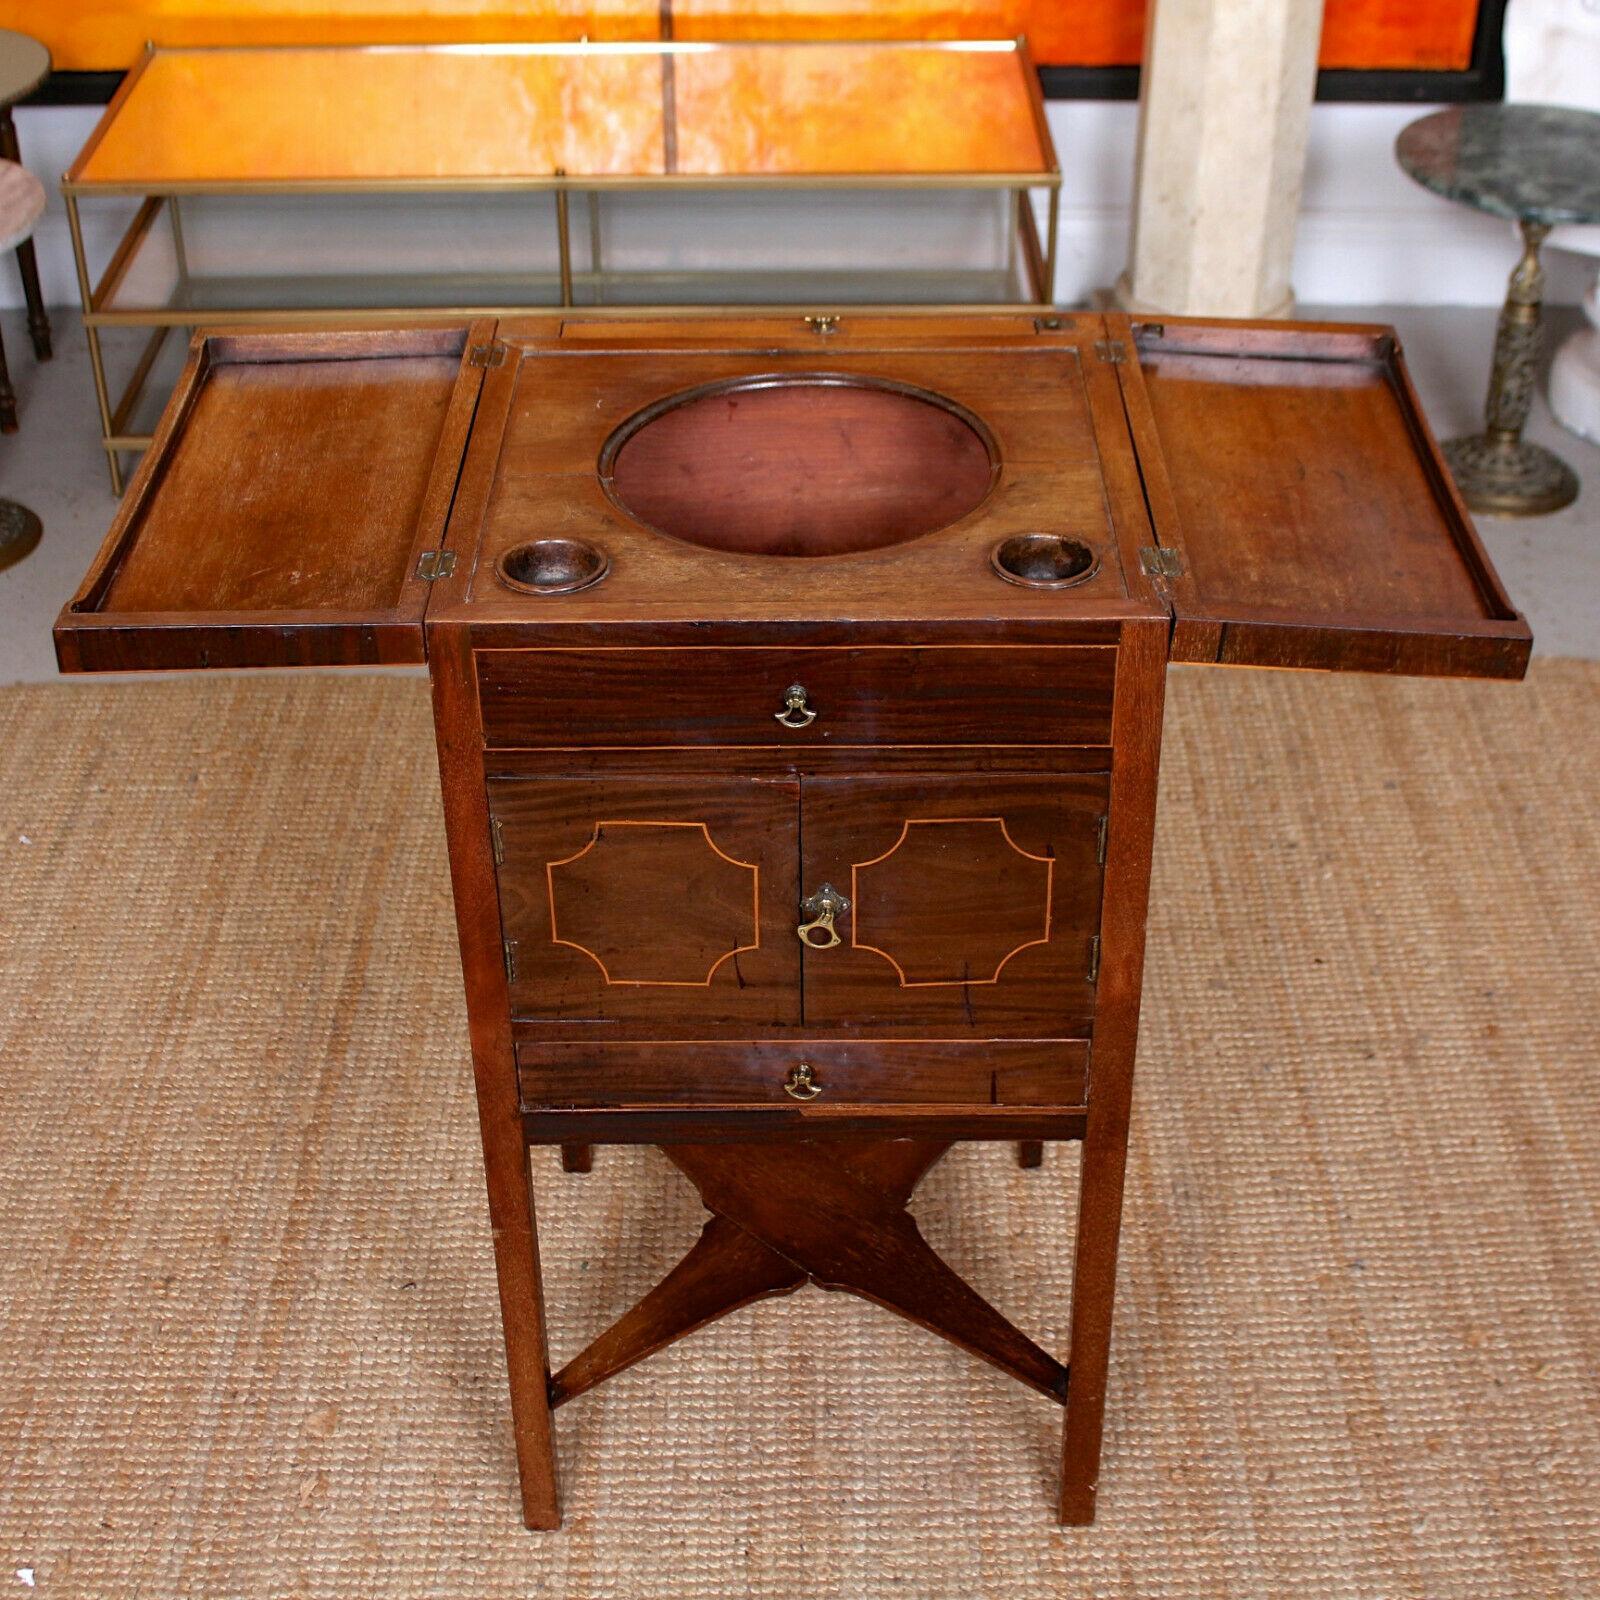 Antique Washstand Shaving Vanity Mirror Stand C1780 Mahogany Bathroom Cabinet In Good Condition For Sale In Newcastle upon Tyne, GB